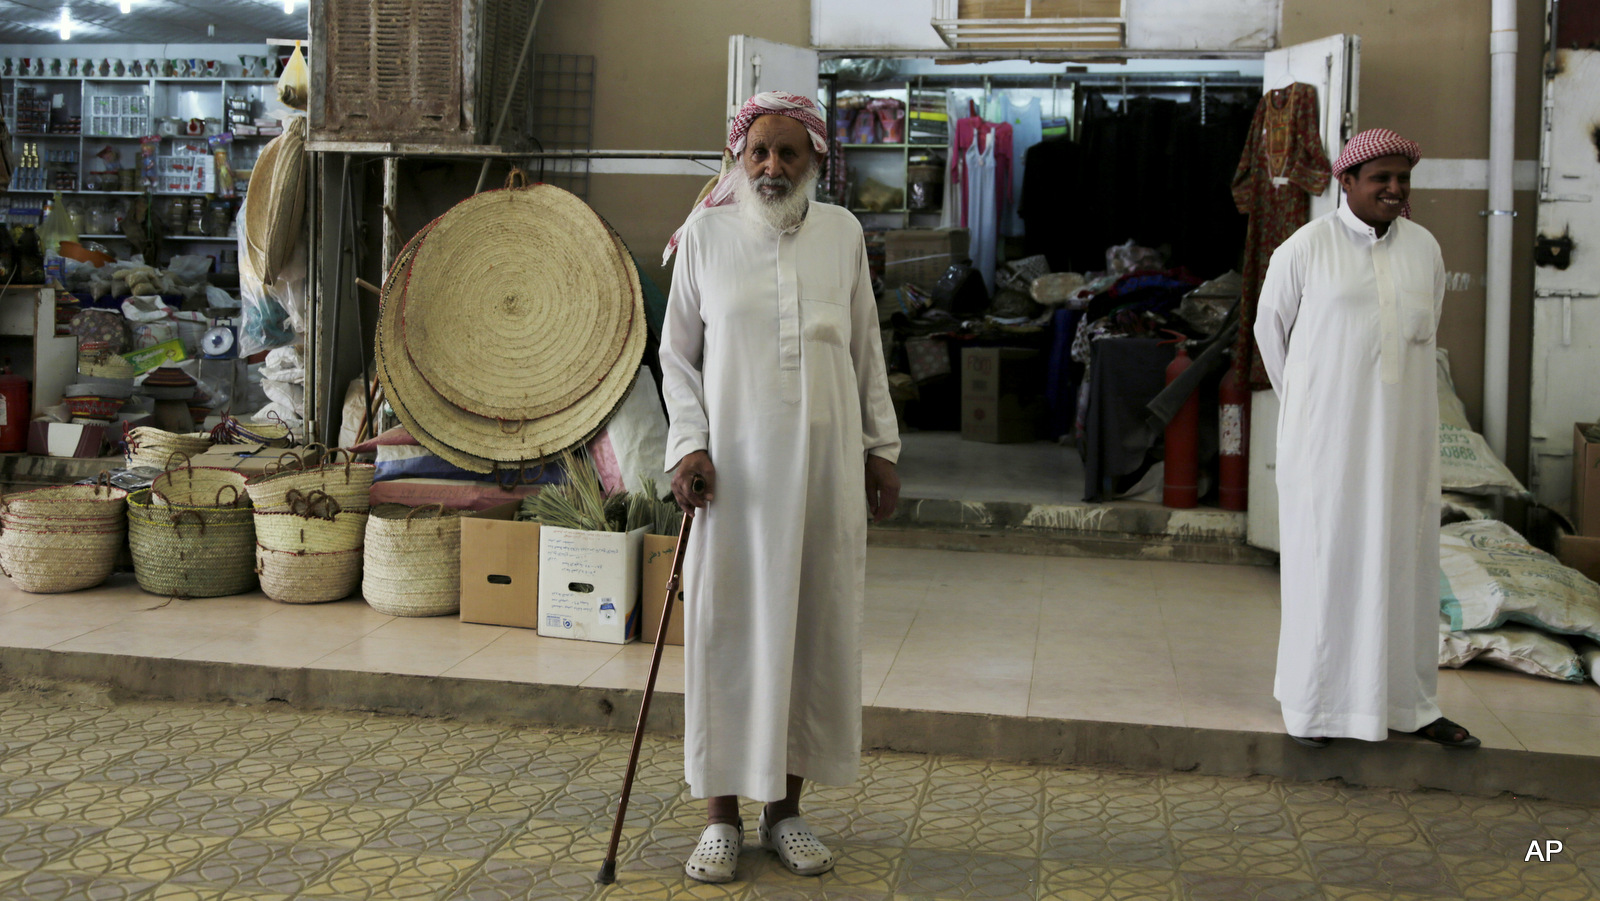 A Saudi merchant stands in front of stores in the old market in Najran, Saudi Arabia, where the local Sunni tribes, inspired by the Houthis of Yemen, have declared the rule of Saudi King Salman as illegitimate.